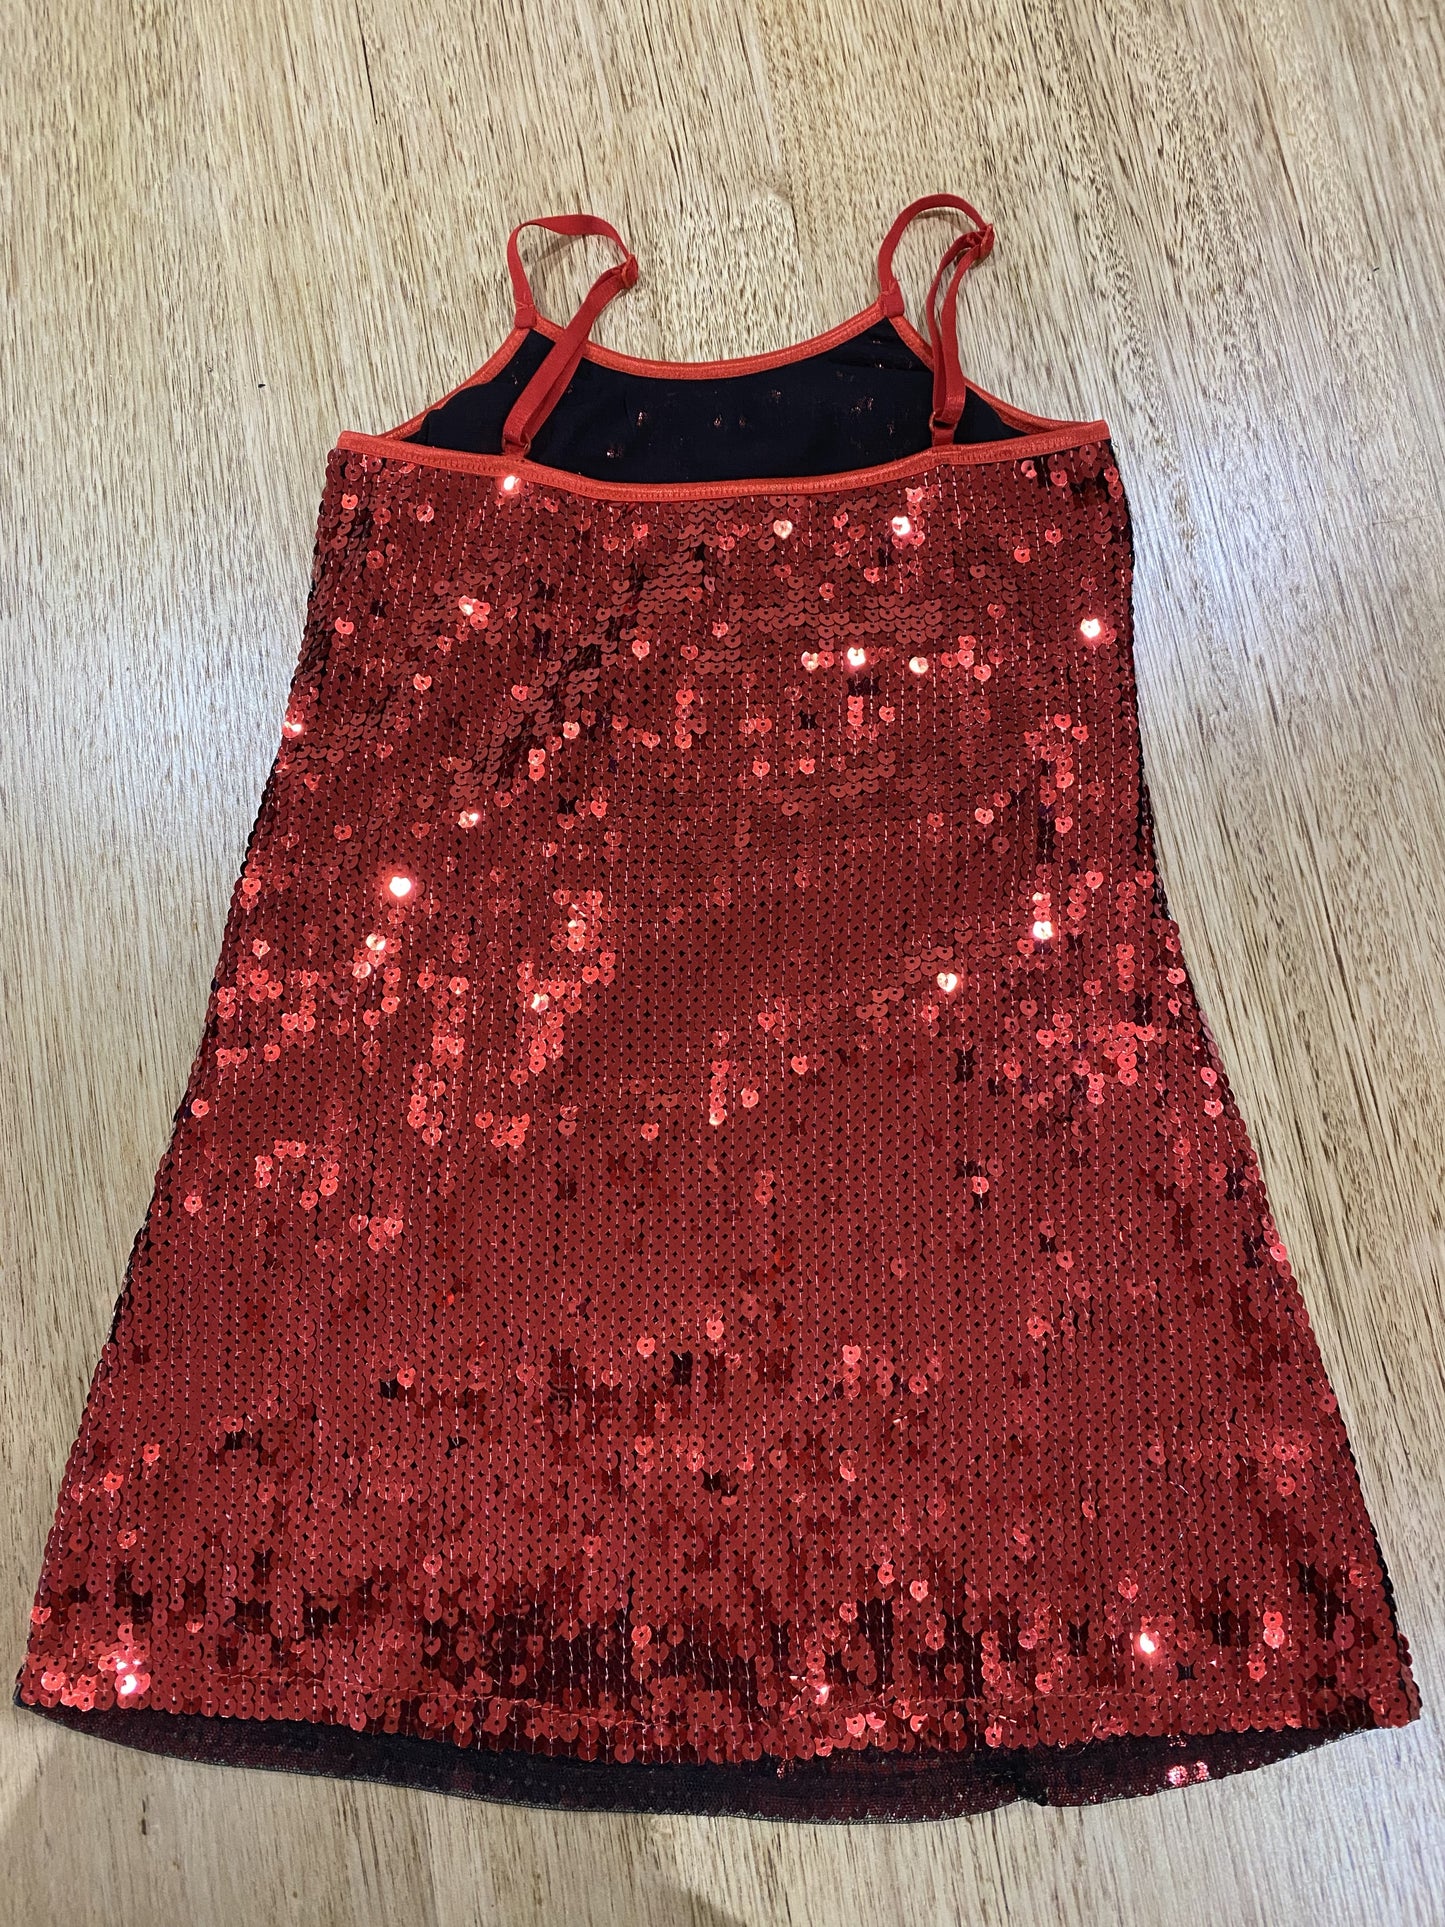 A7654 firecracker - red sequined A line dress with stars - Small Child